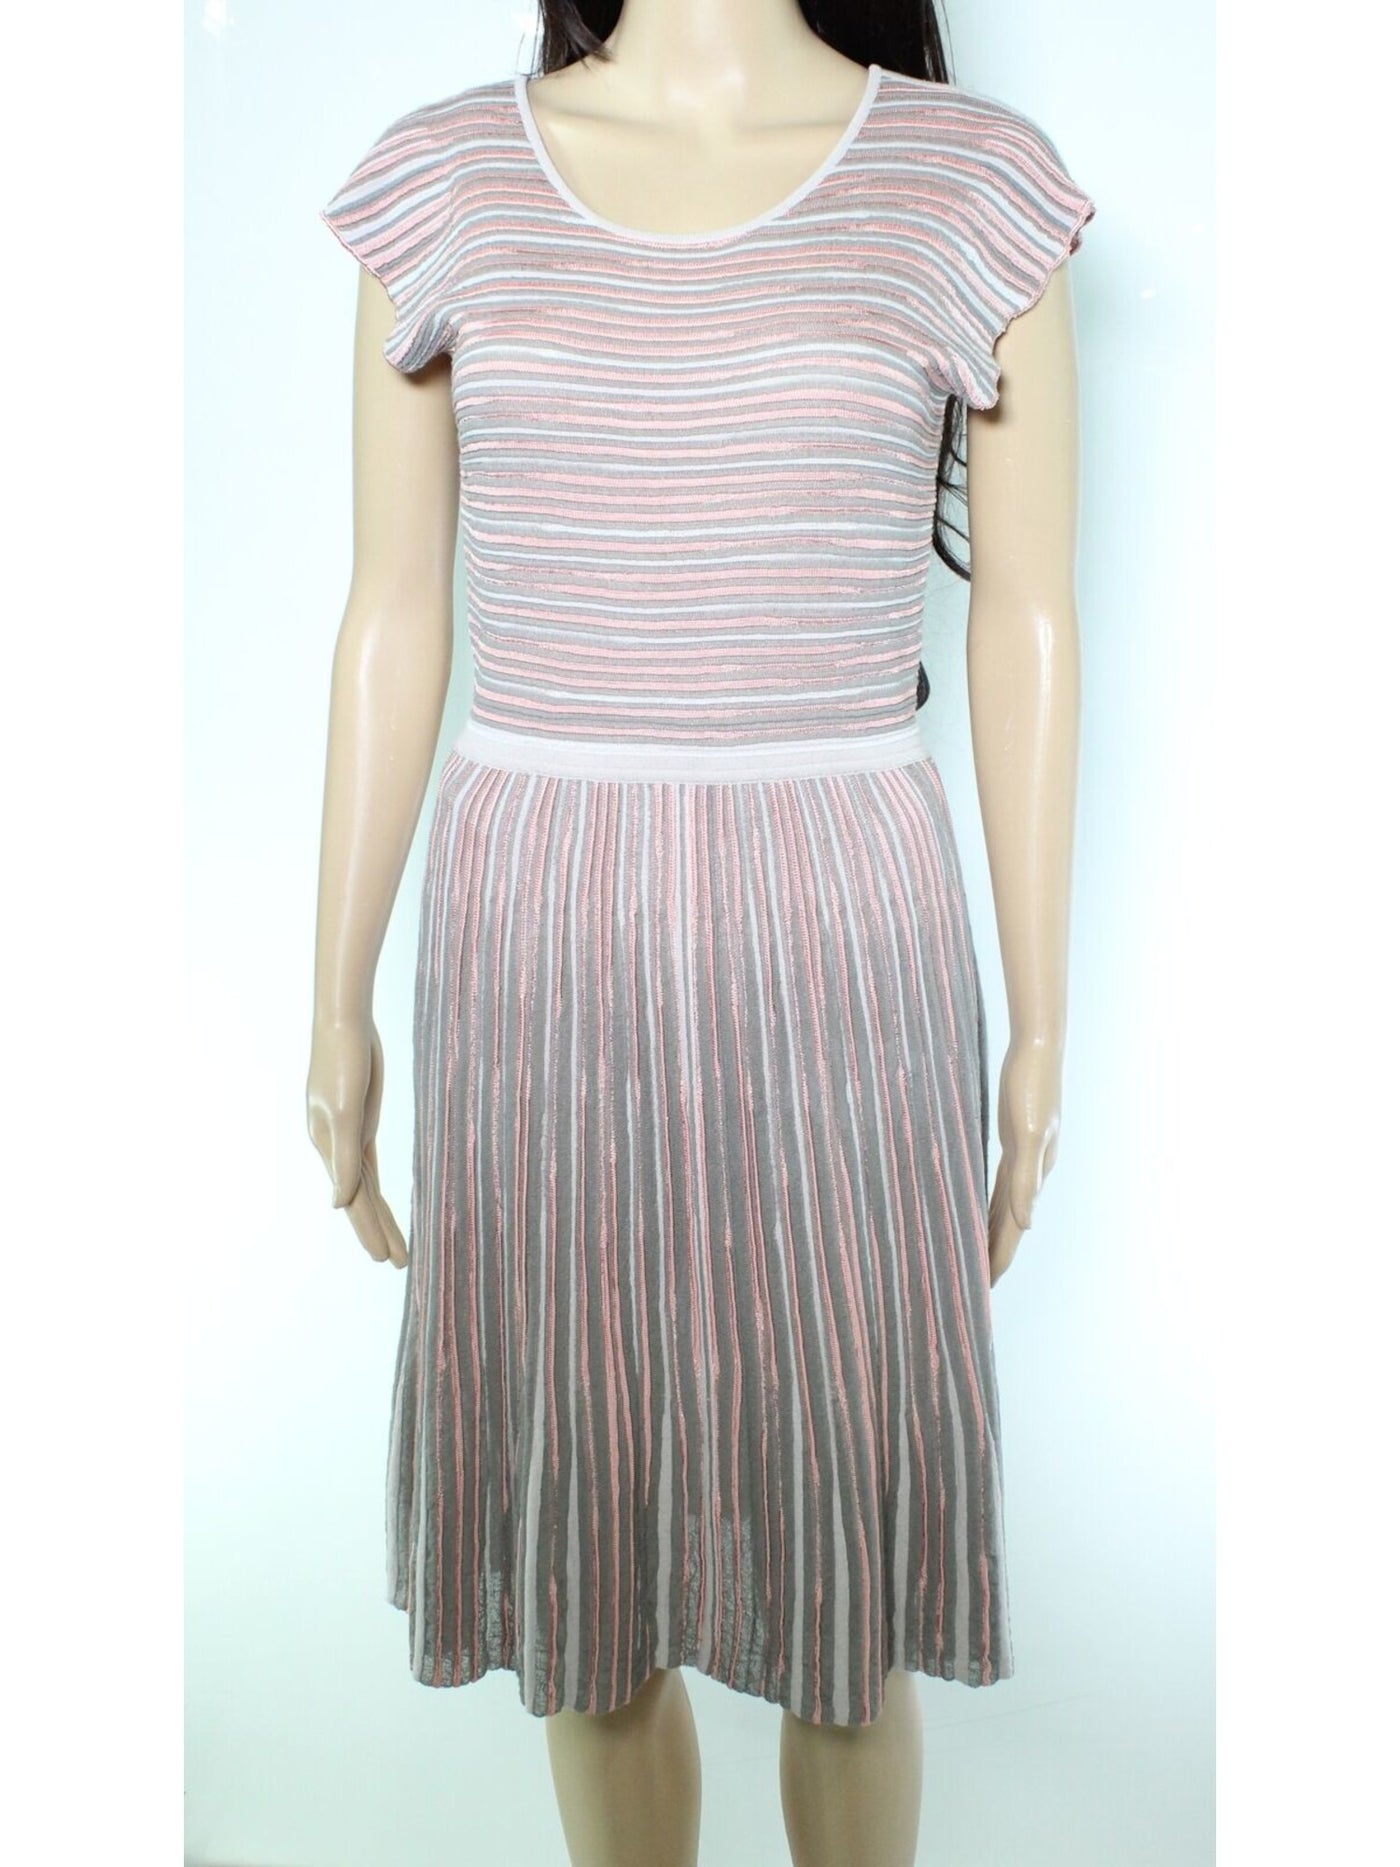 EMPORIO ARMANI Womens Gray Striped Scoop Neck Knee Length Wear To Work Fit + Flare Dress 40